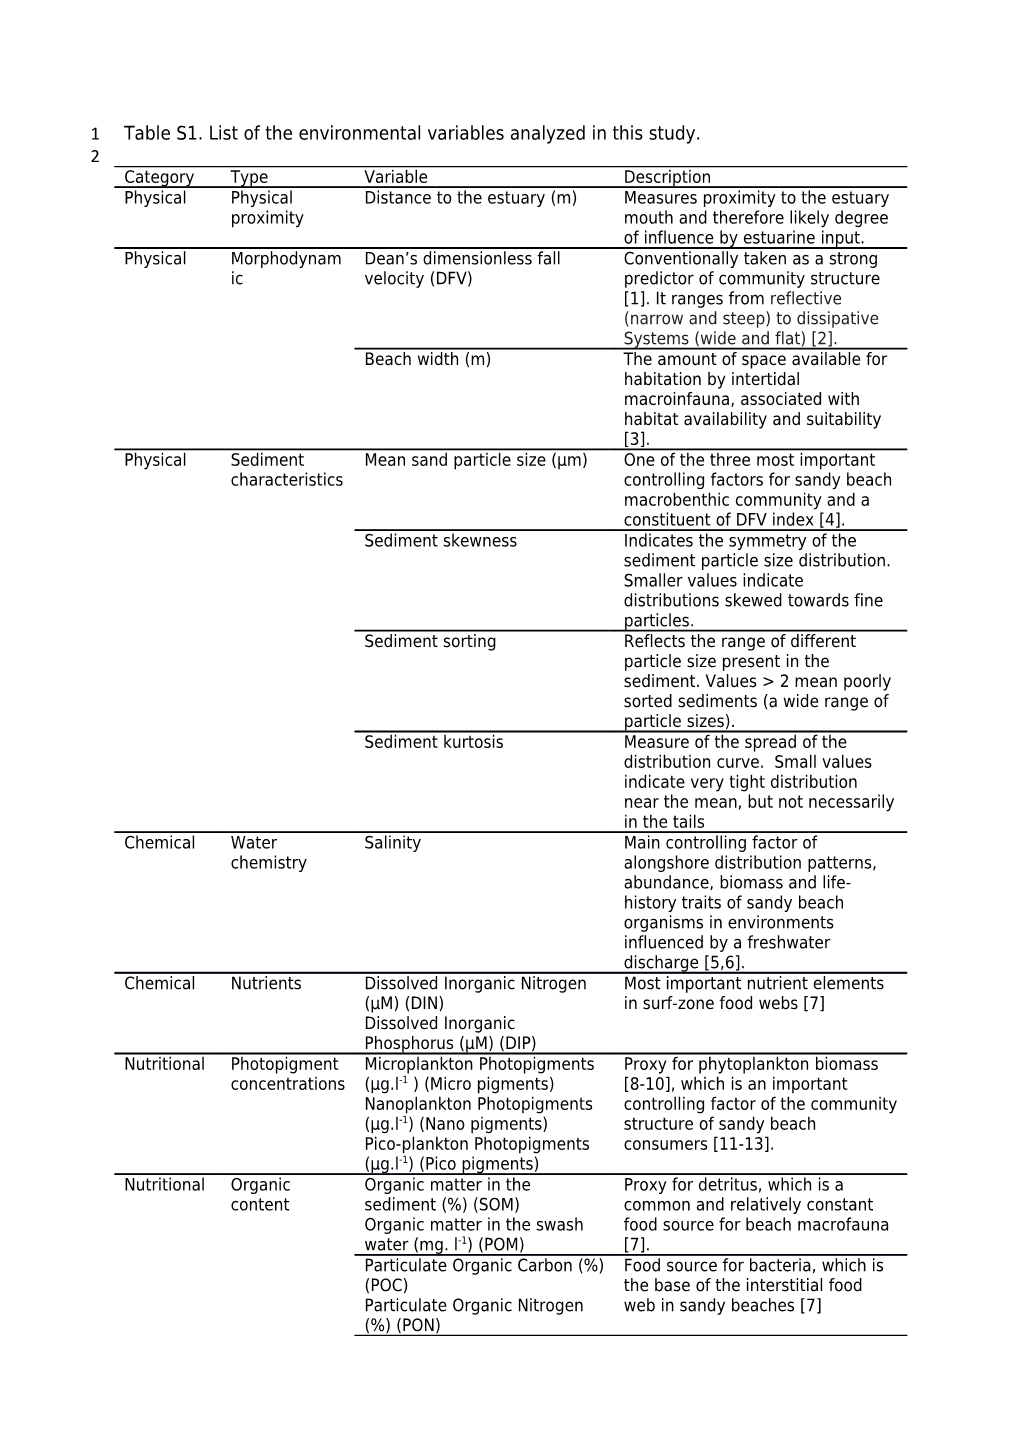 Table S1. List of the Environmental Variables Analyzed in This Study